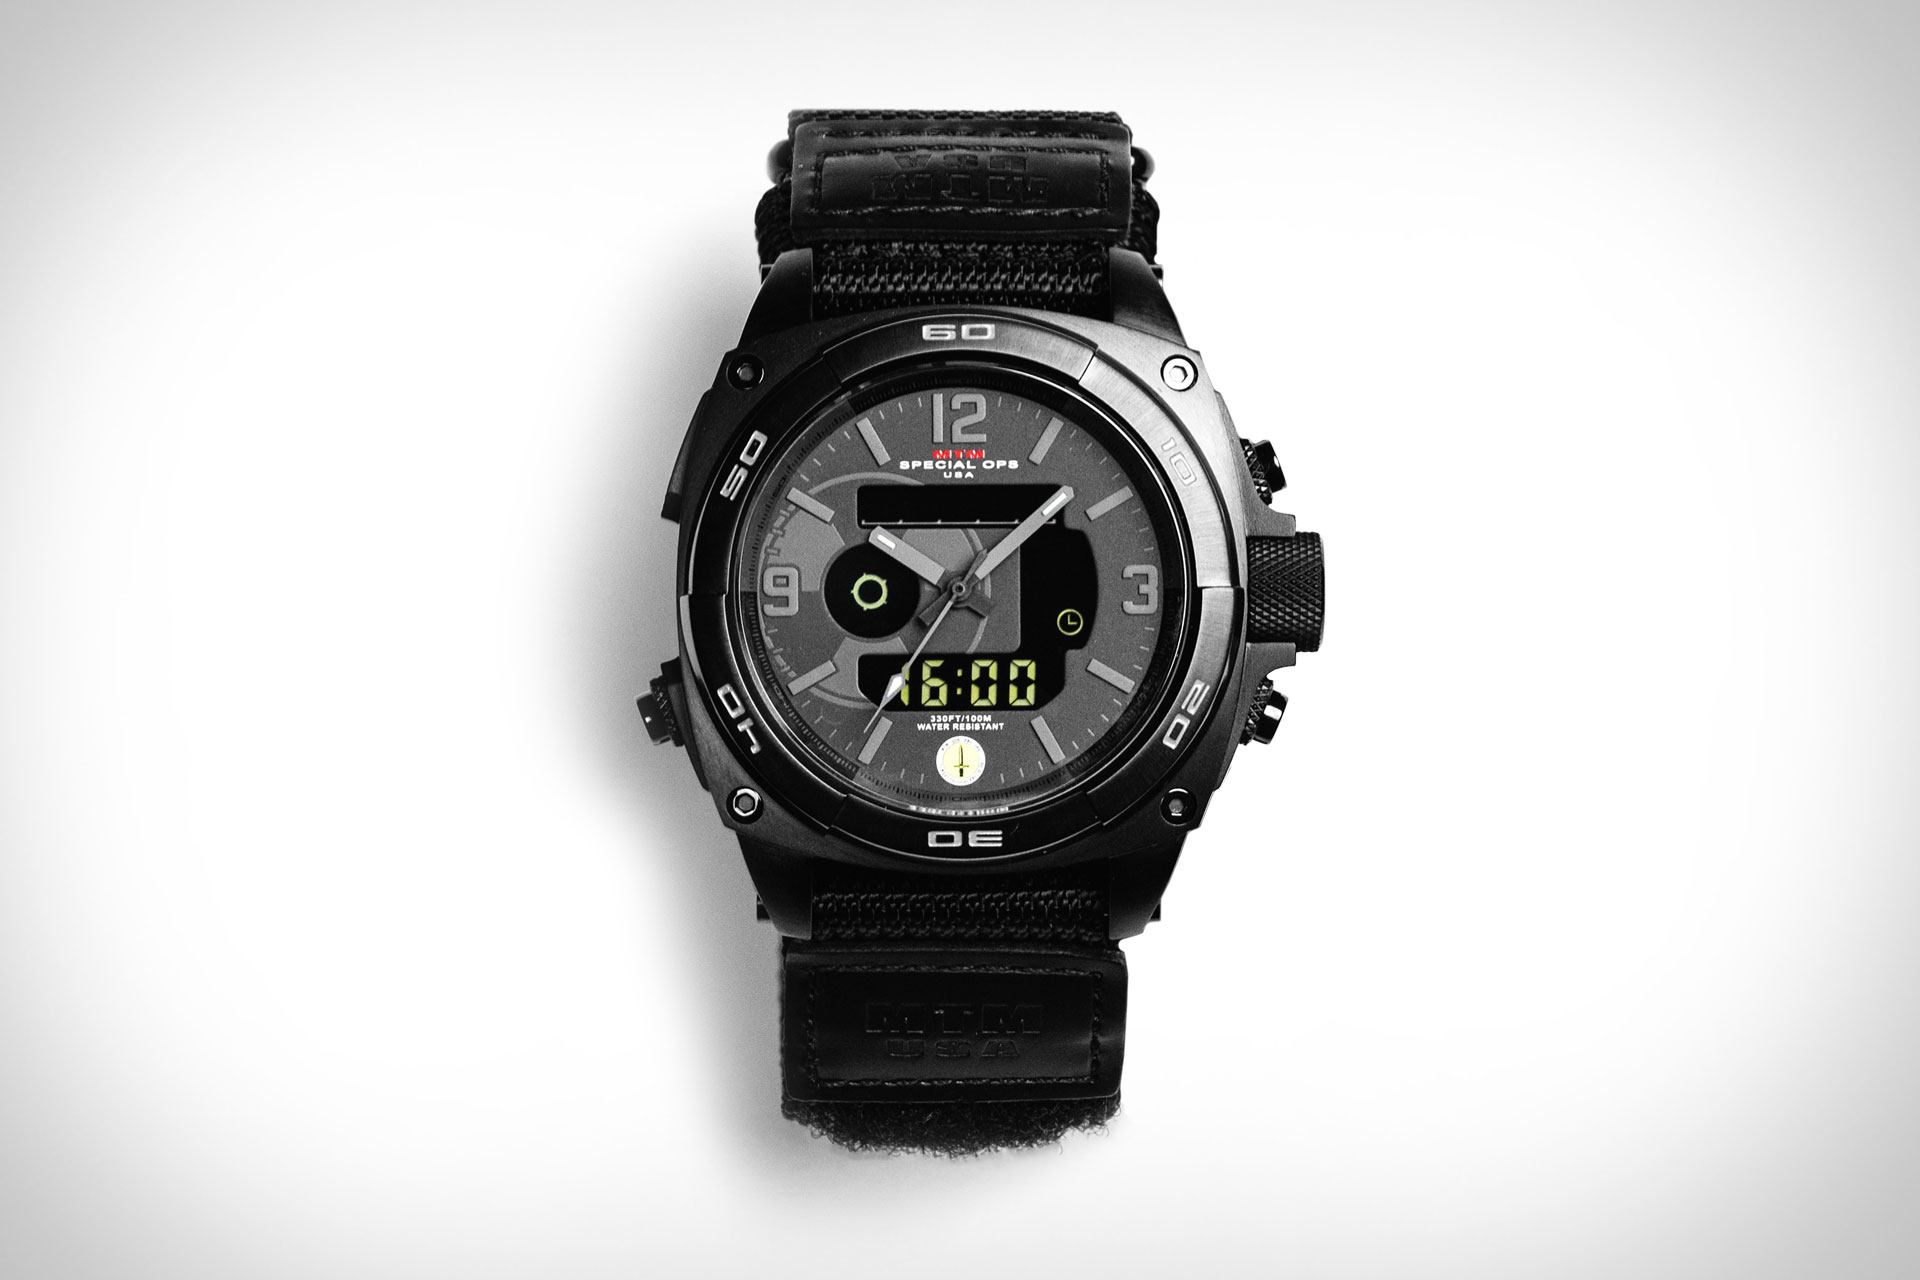 spec ops watches